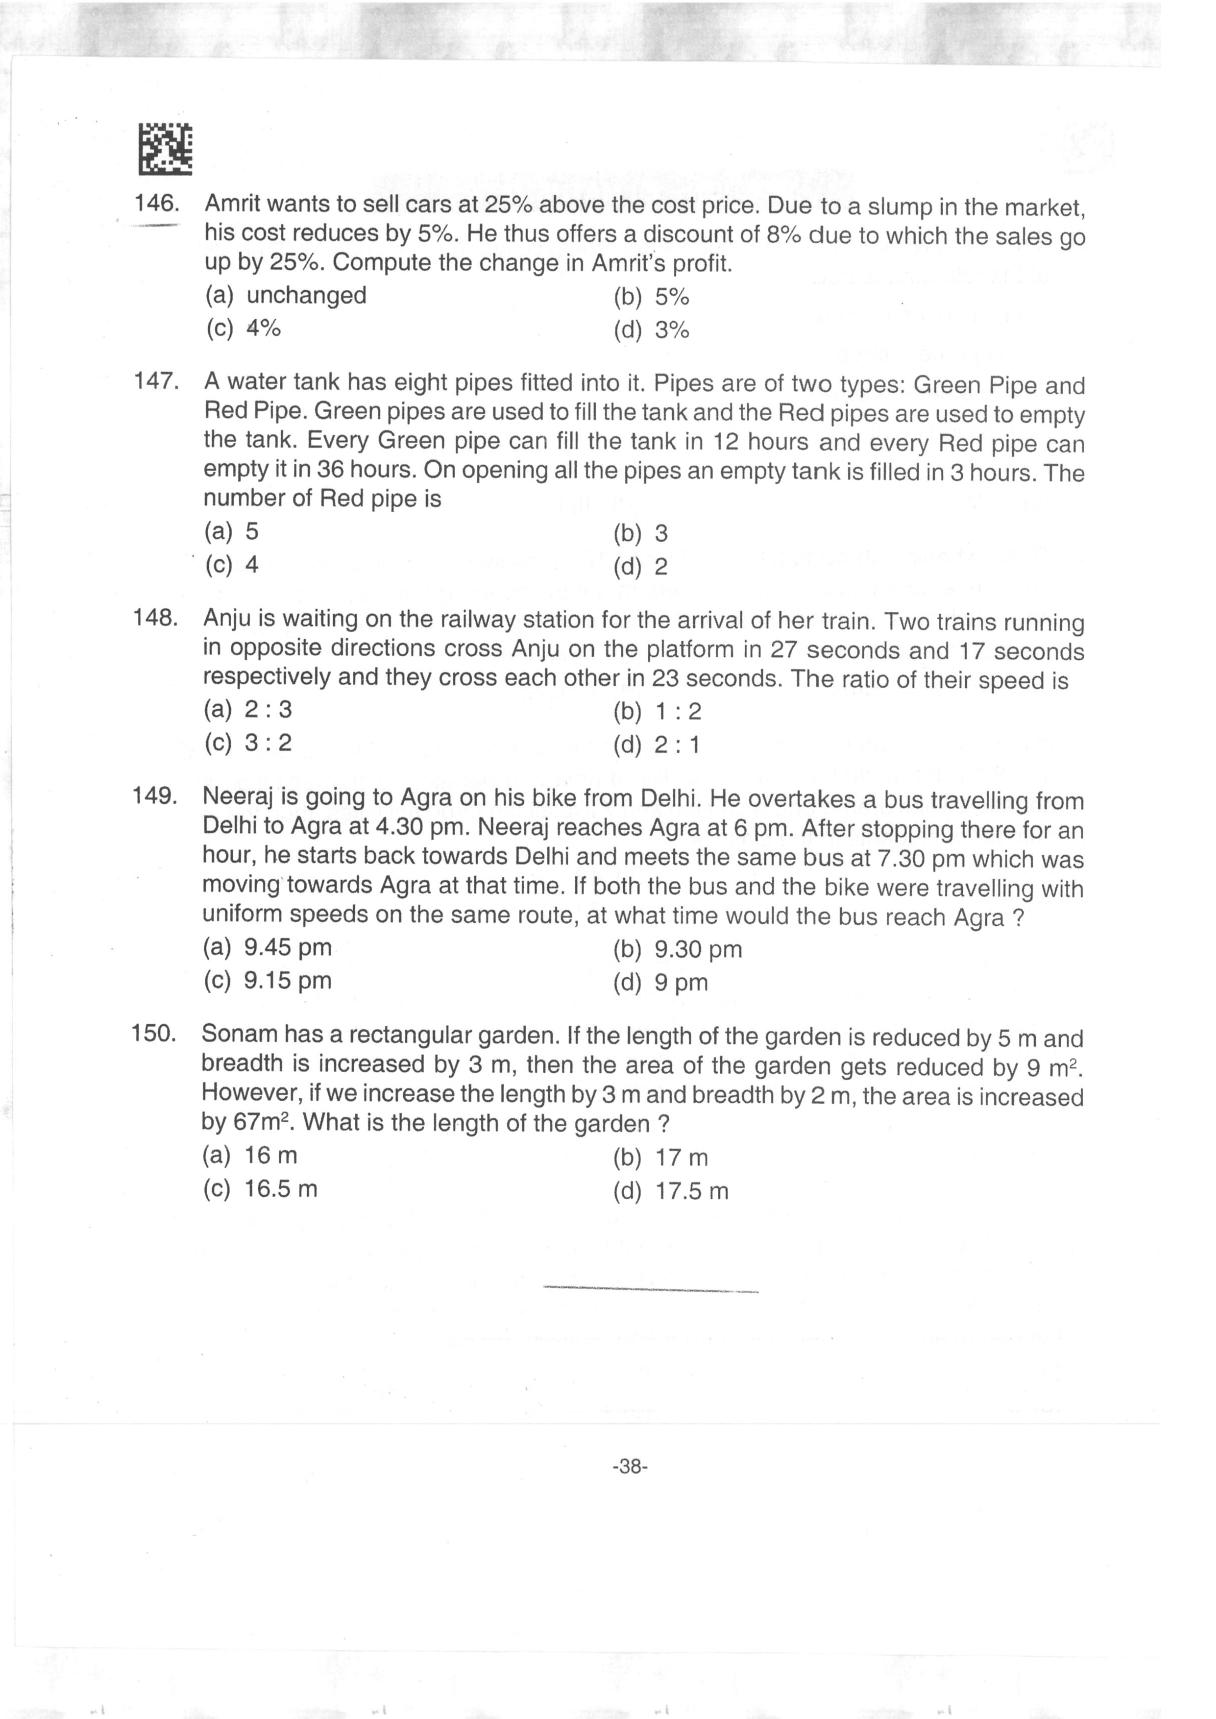 AILET 2019 Question Paper for BA LLB - Page 38